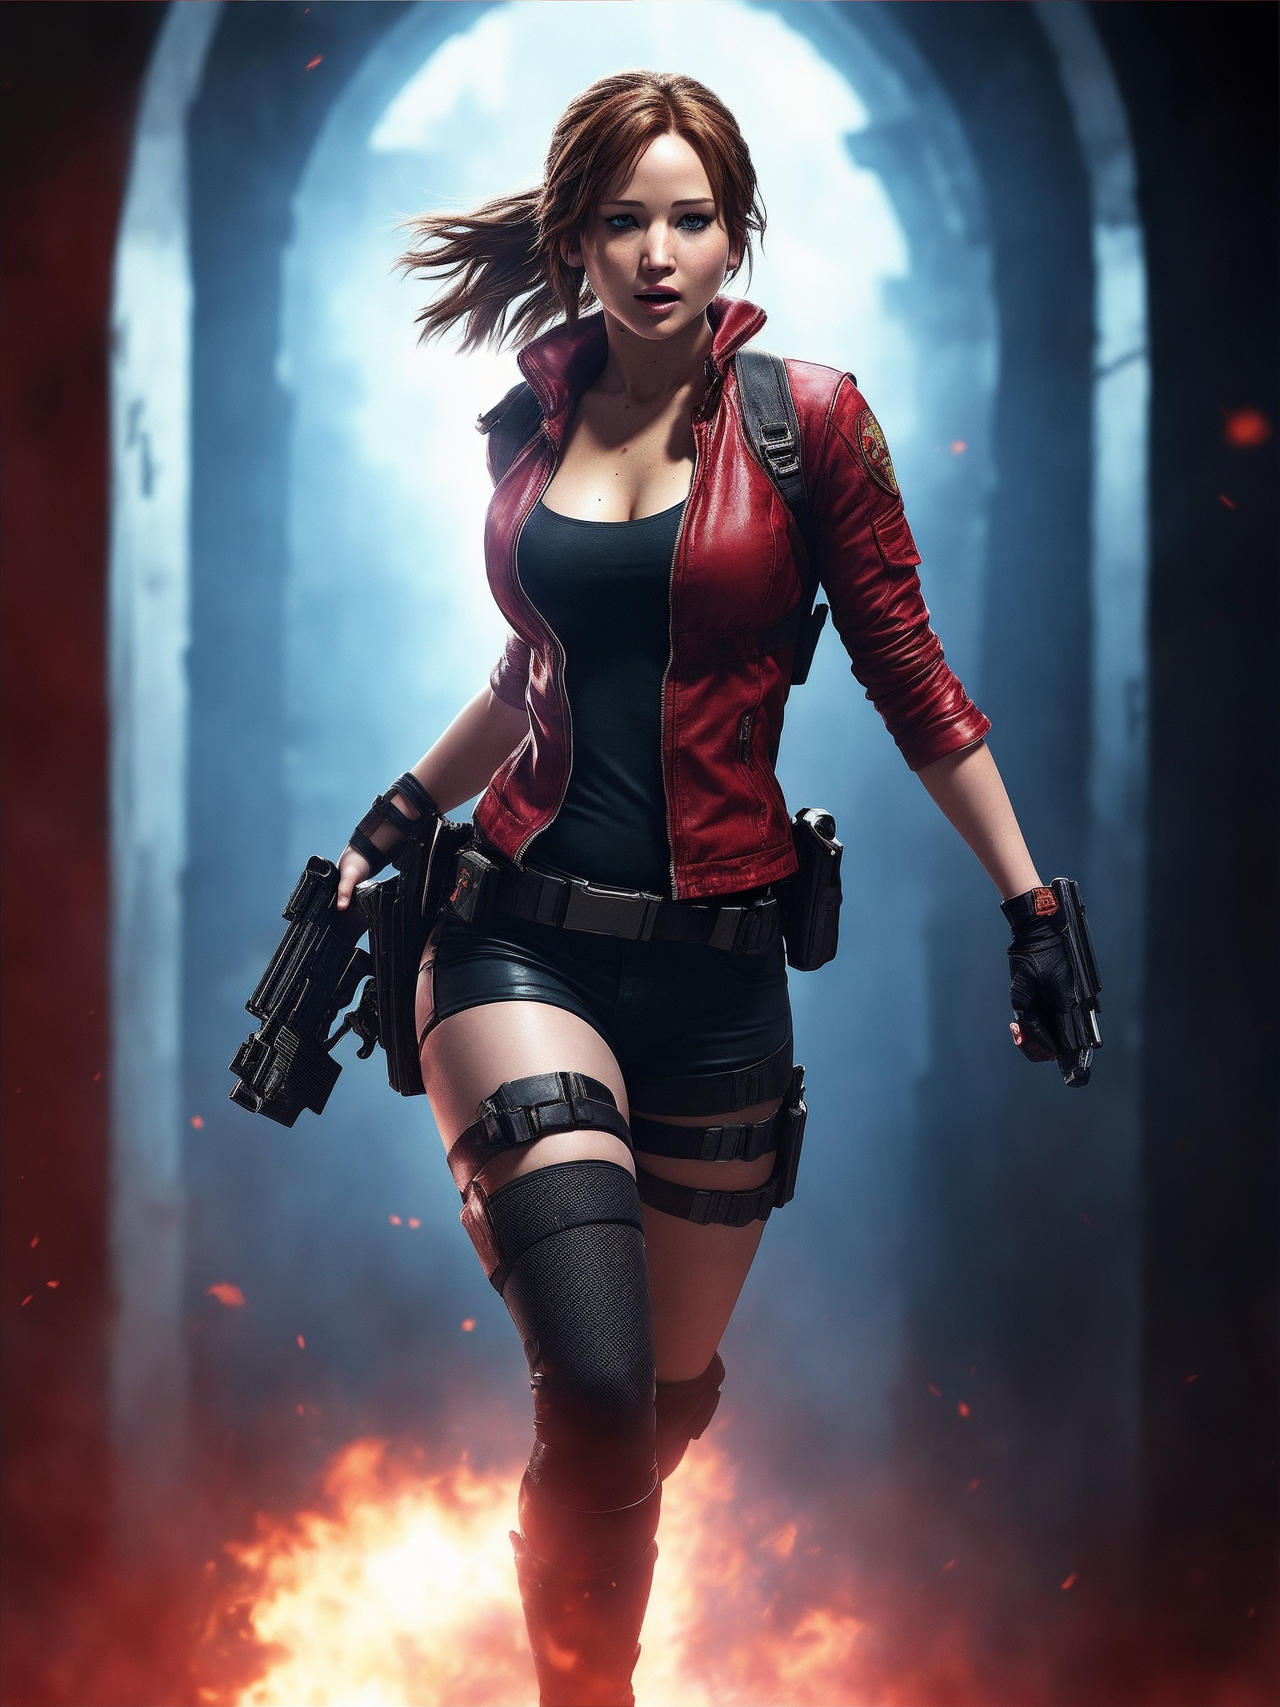 Jennifer lawrence with brown hair as claire redfield in a resident evil  cosplay in a movie portrait